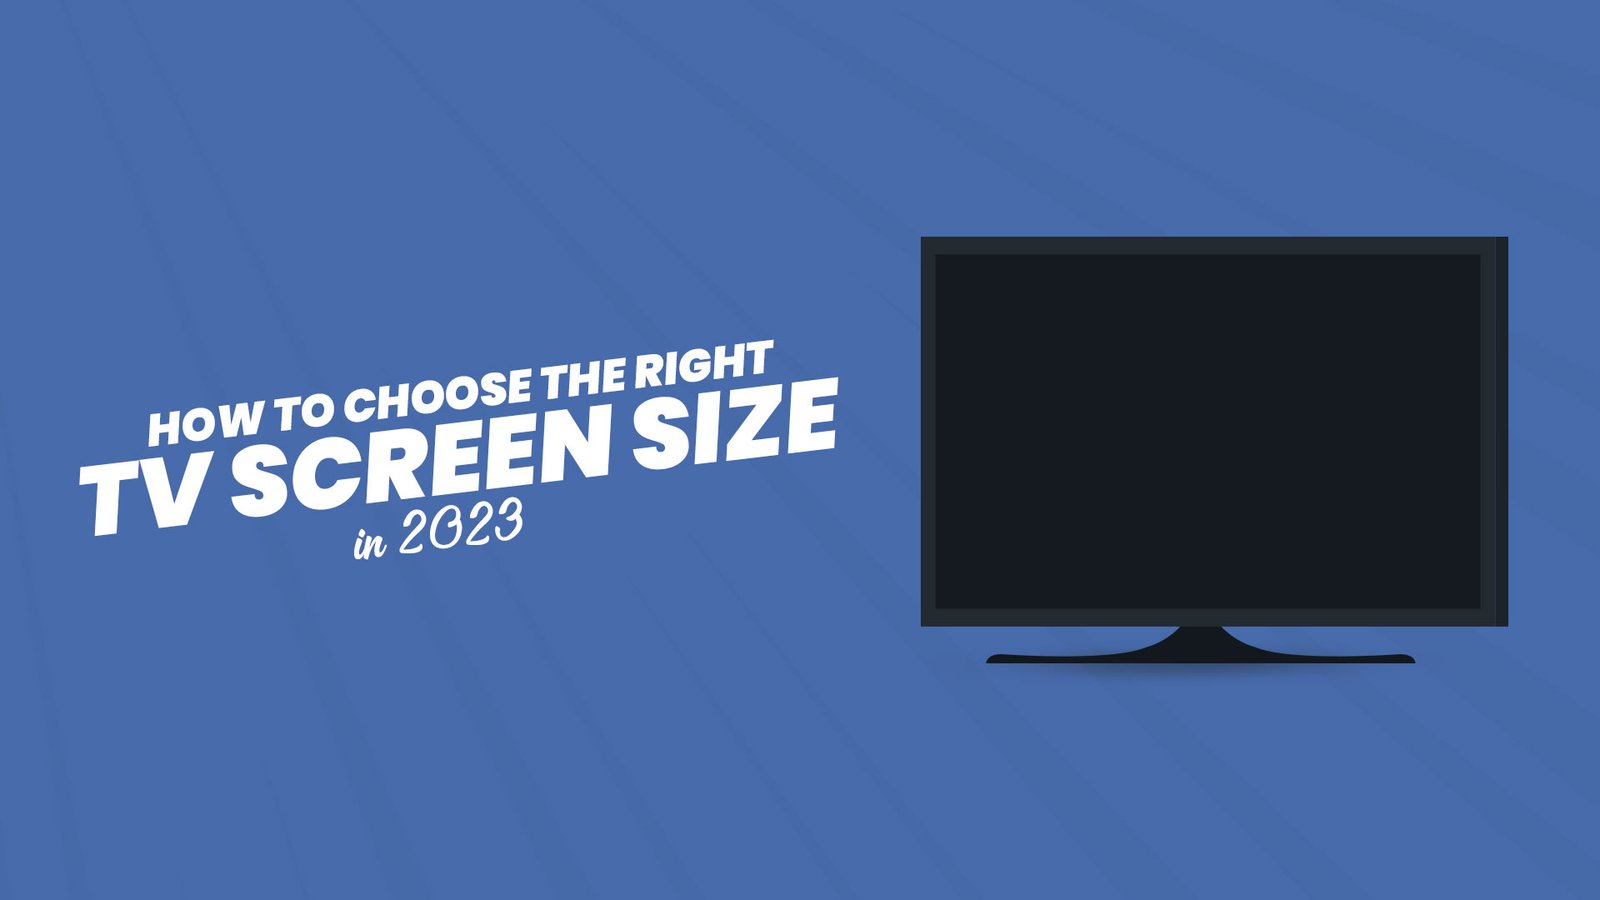 Right TV Screen Size